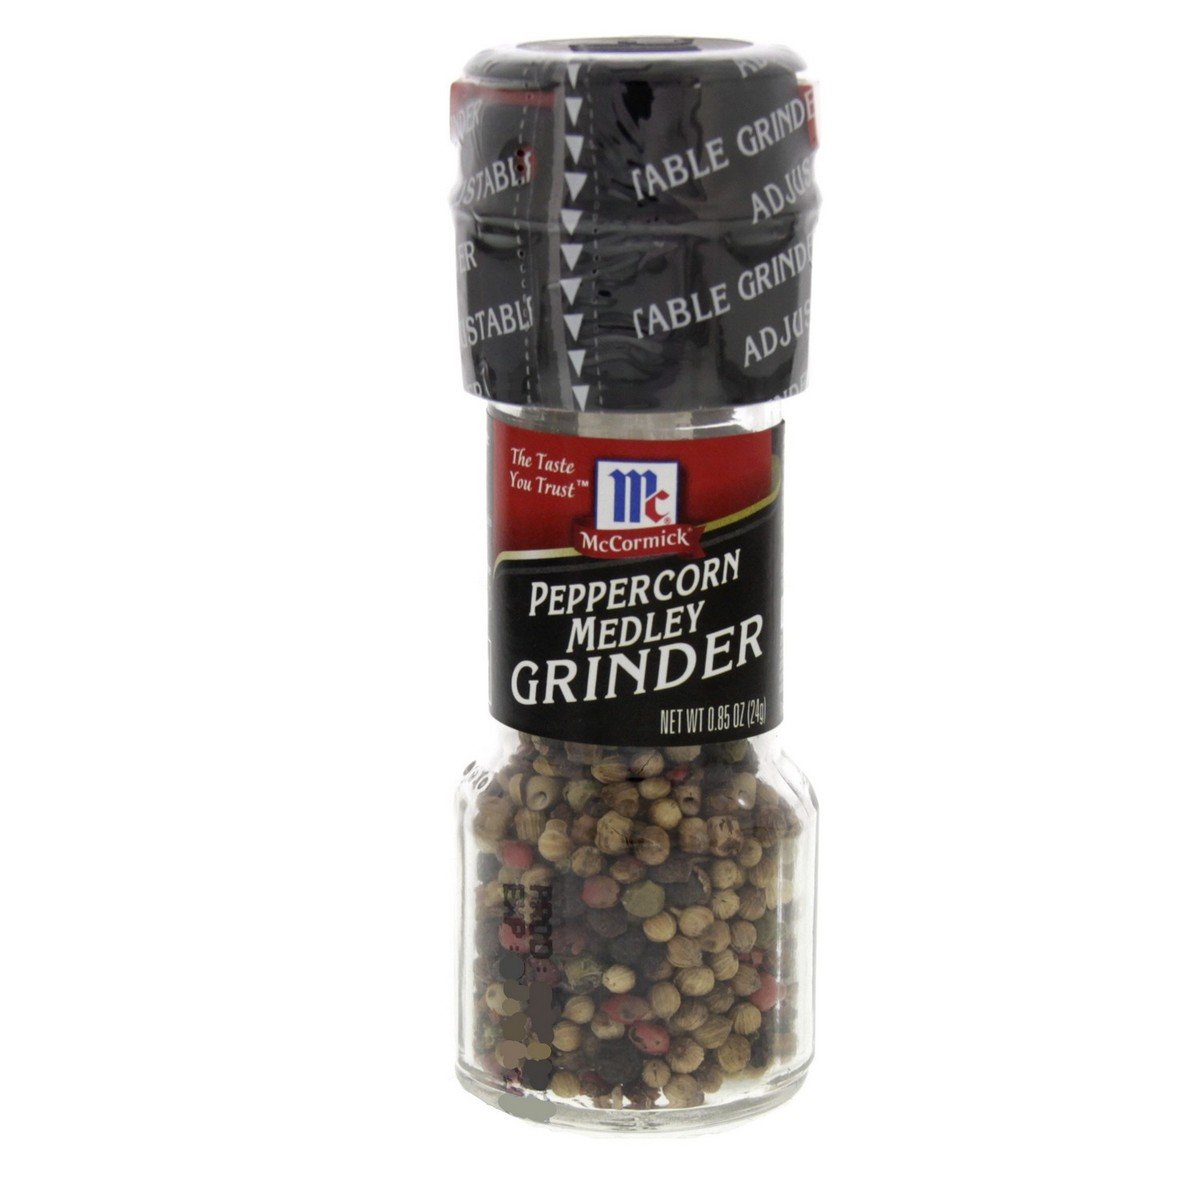 McCormick Peppercorn Medley with Grinder 24g